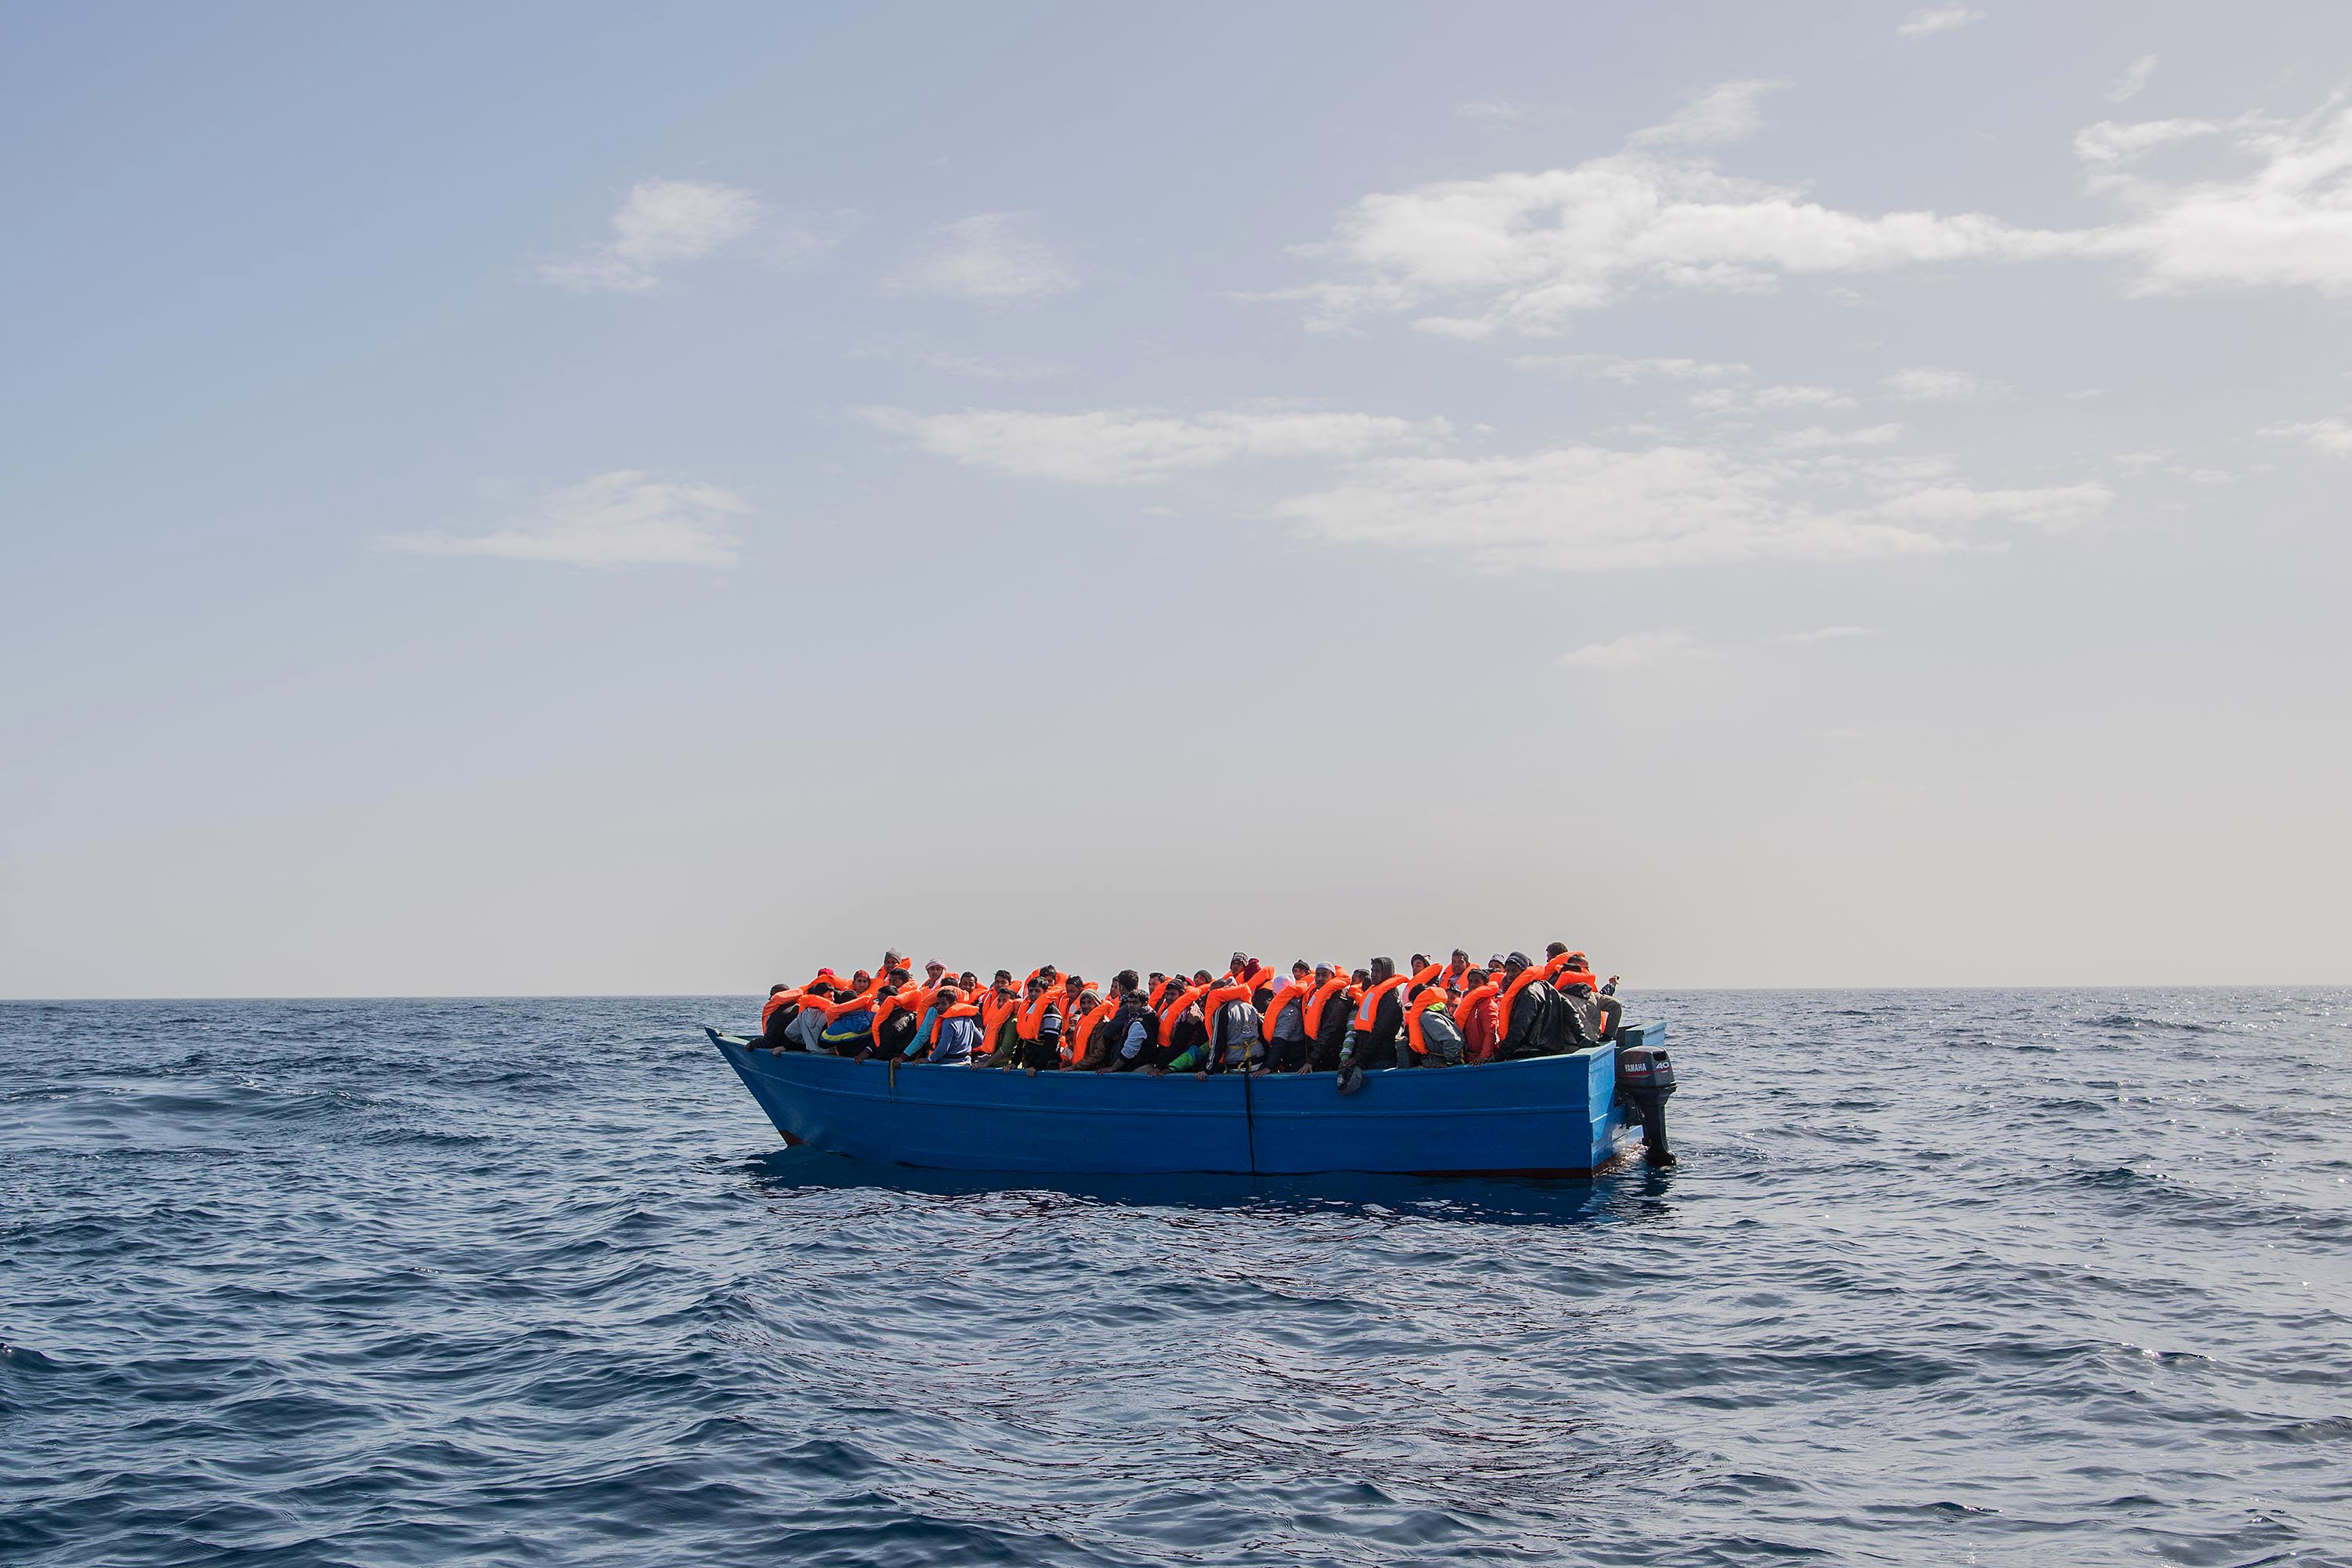 Search And Rescue On The Mediterranean With Proactiva Open Arms